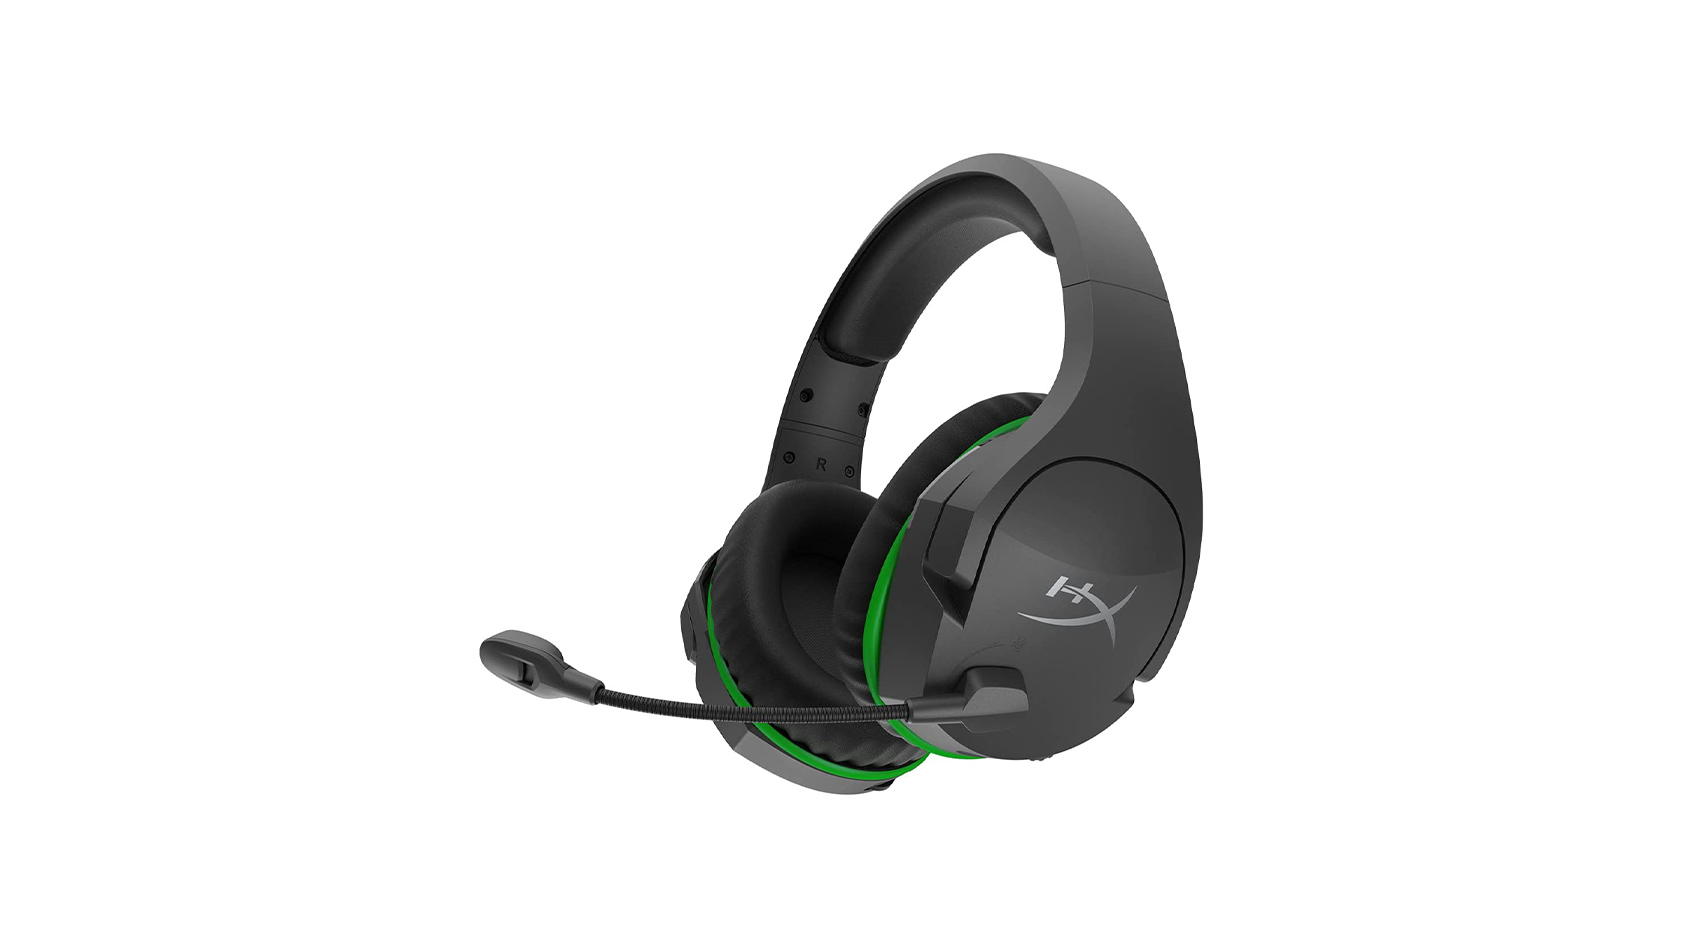 The HyperX CloudX Stinger Core gaming headset in black/green against a white background.